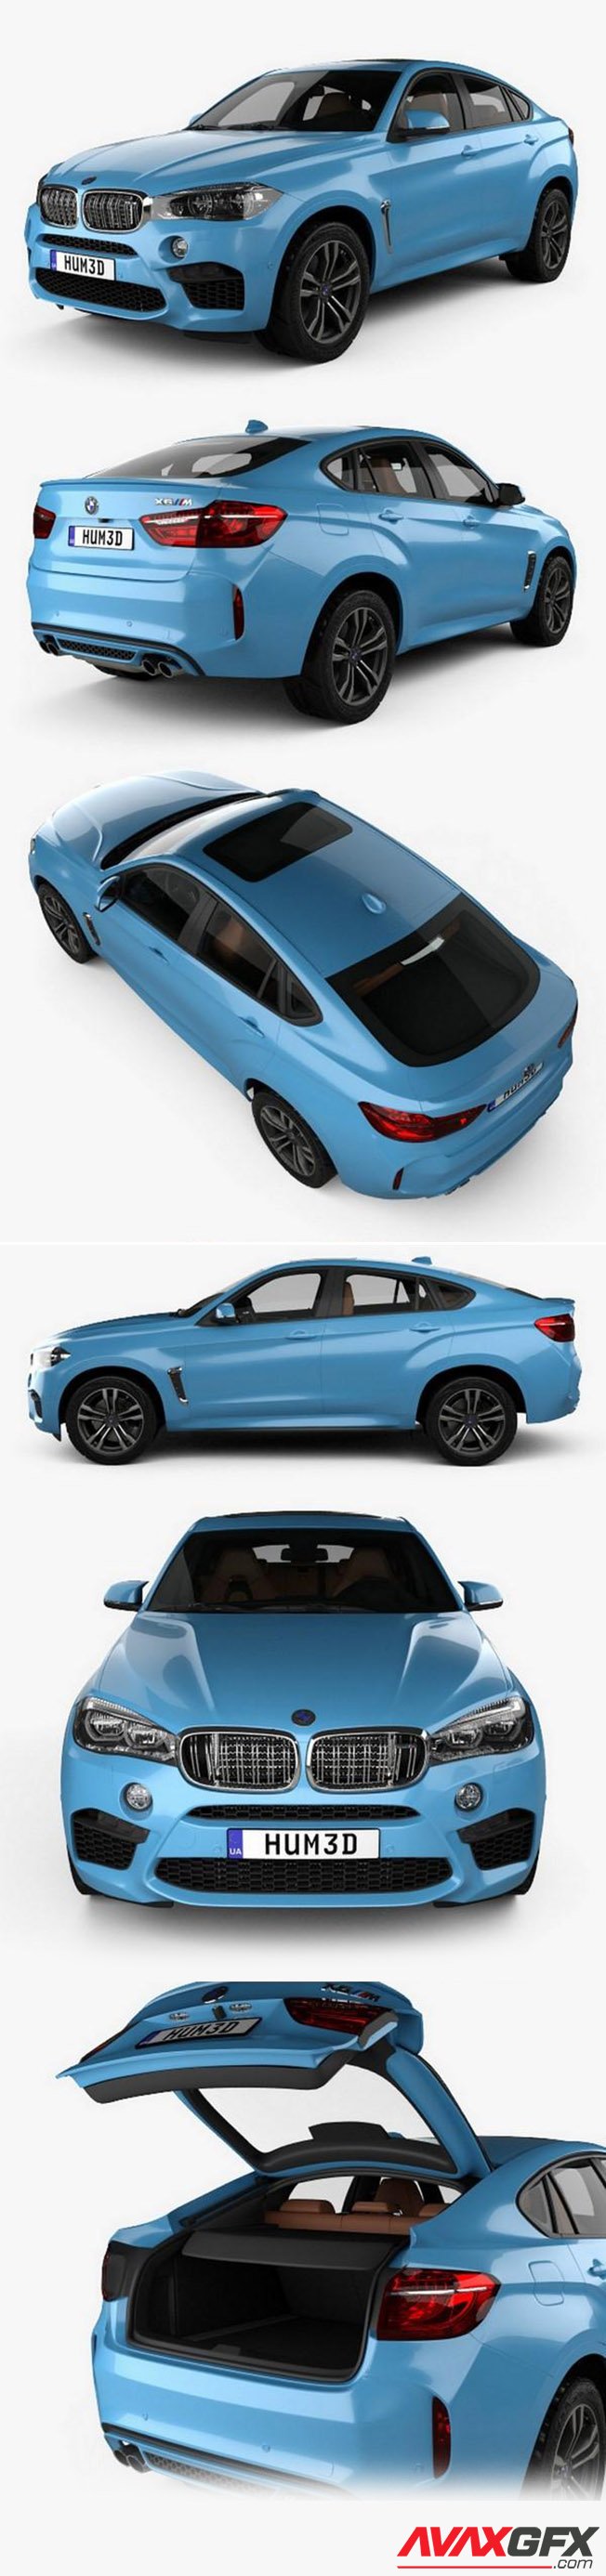 BMW X6 M with HQ interior 2017 3D